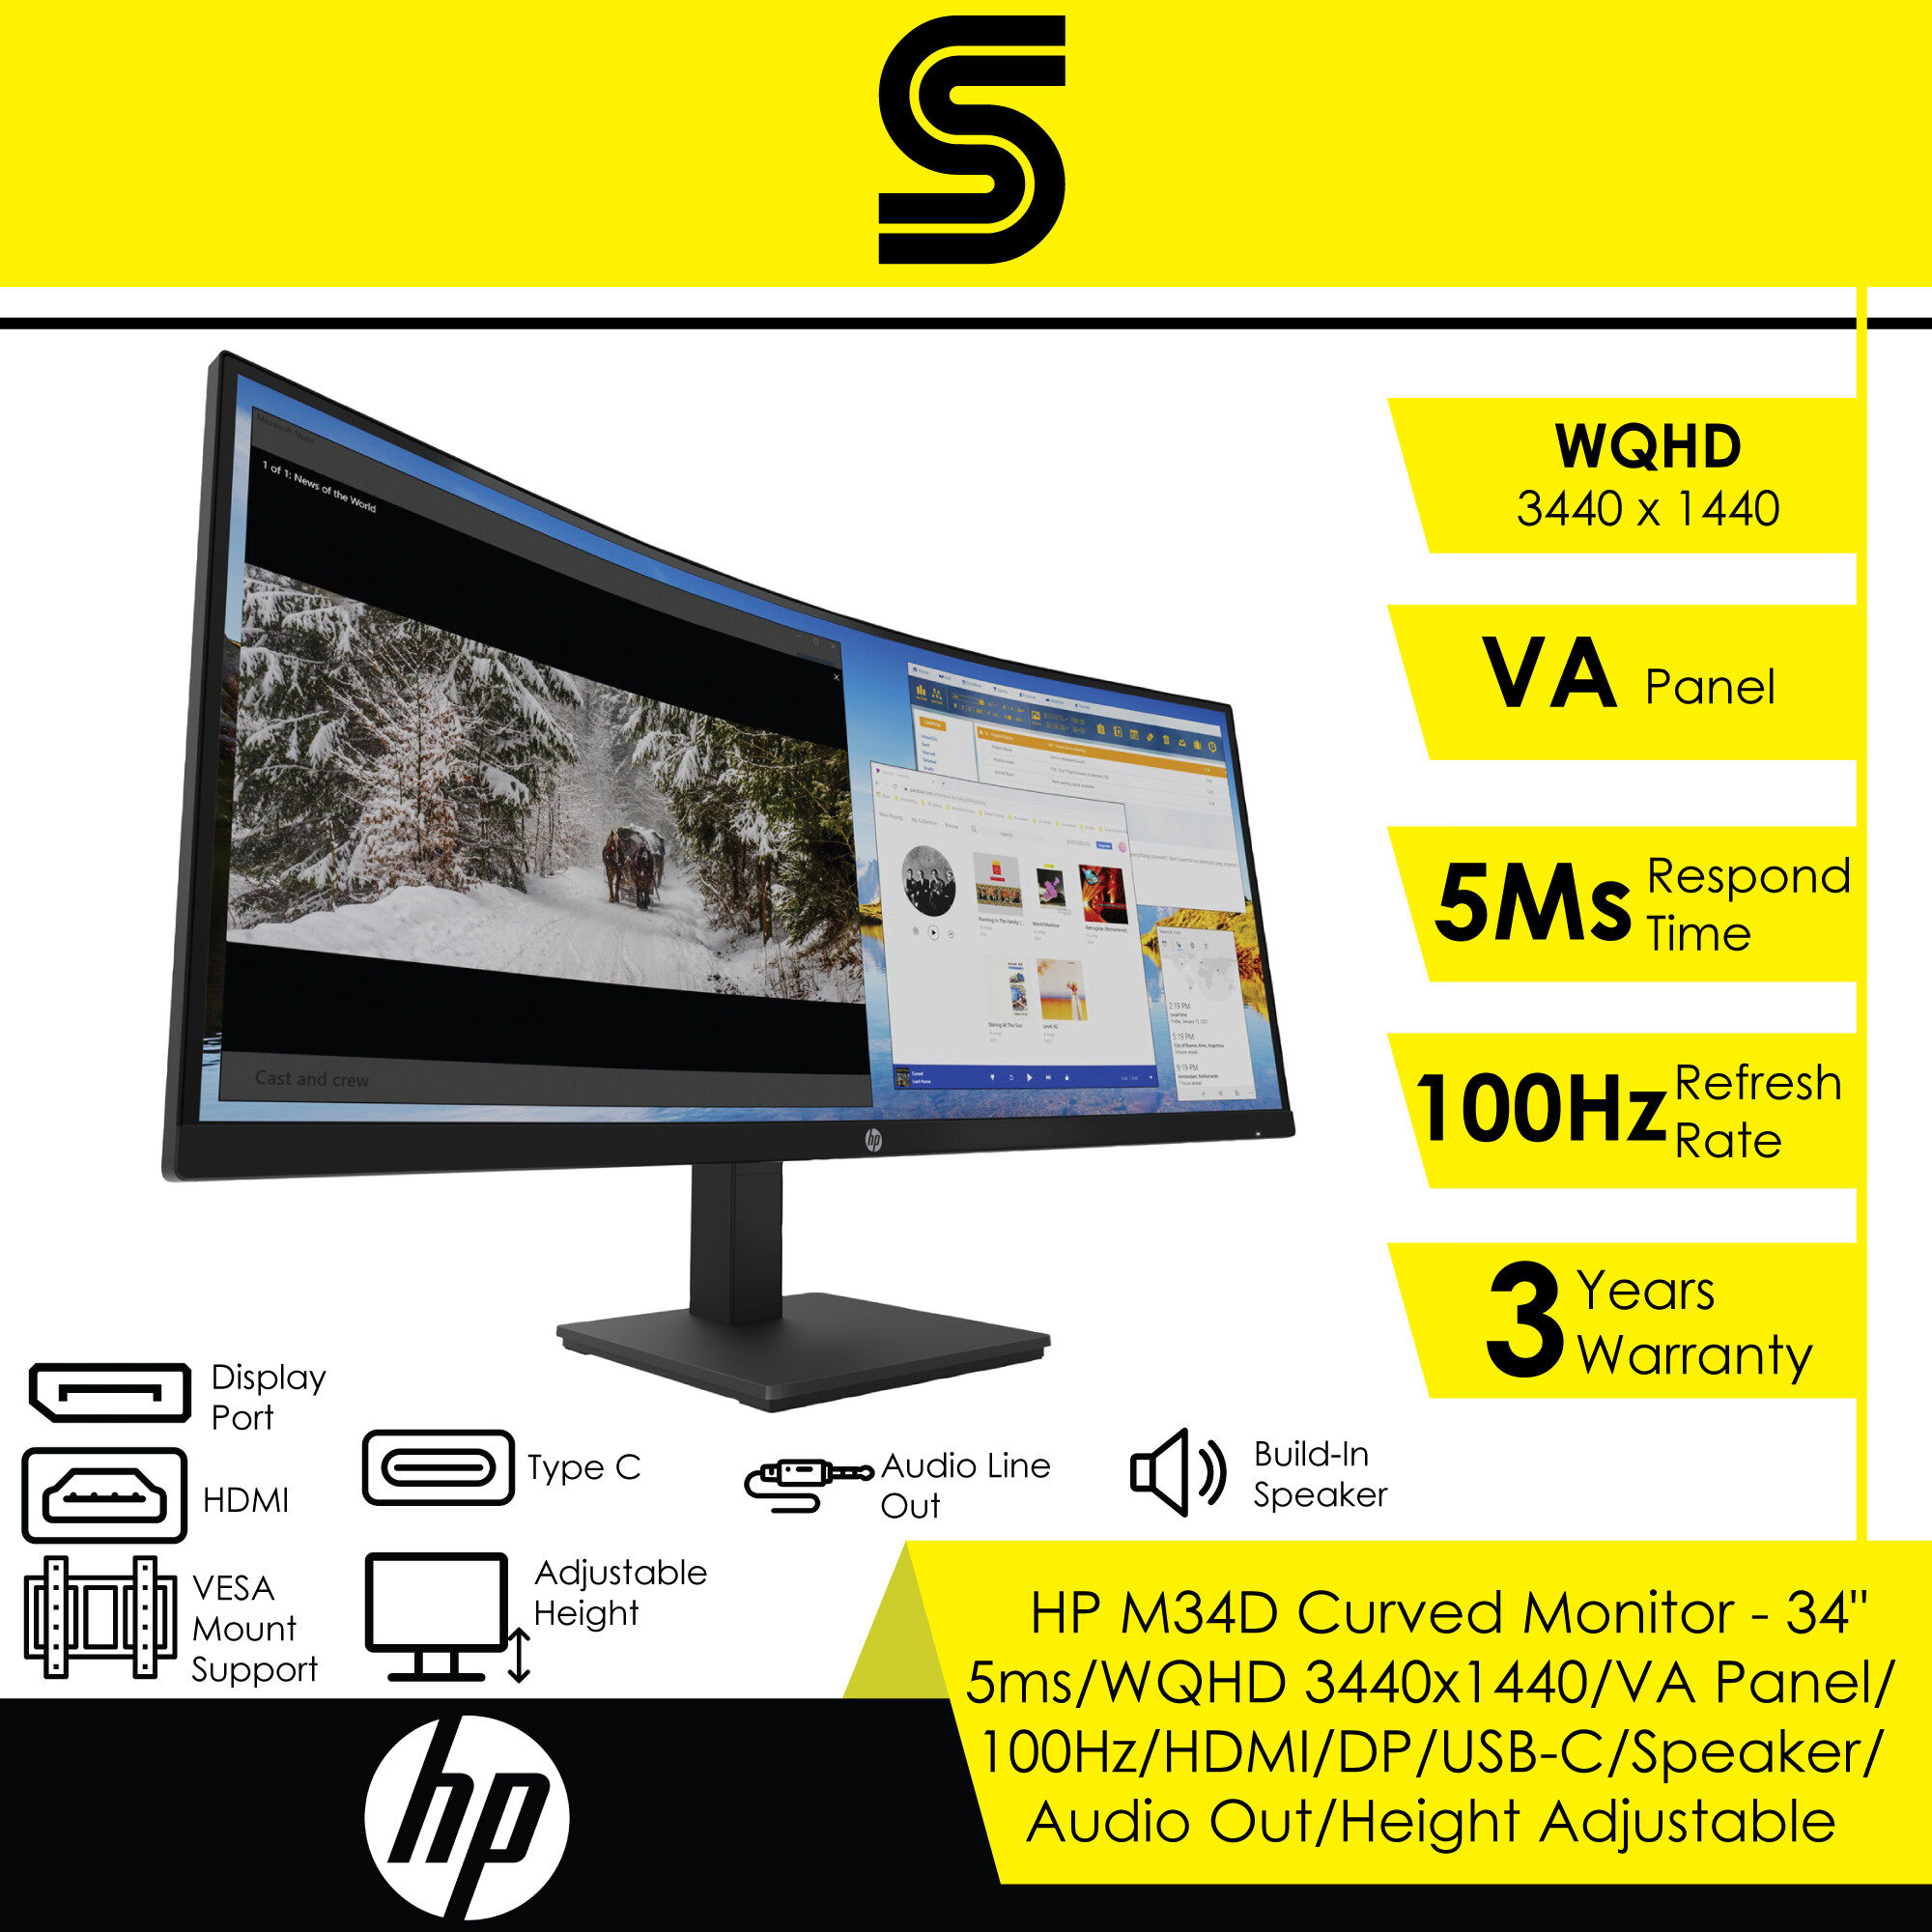 HP M34D Curved Monitor - 34"/5ms/WQHD 3440x1440/VA Panel/100Hz/HDMI/DP/USB-C/Speaker/Audio Out/Height Adjustable